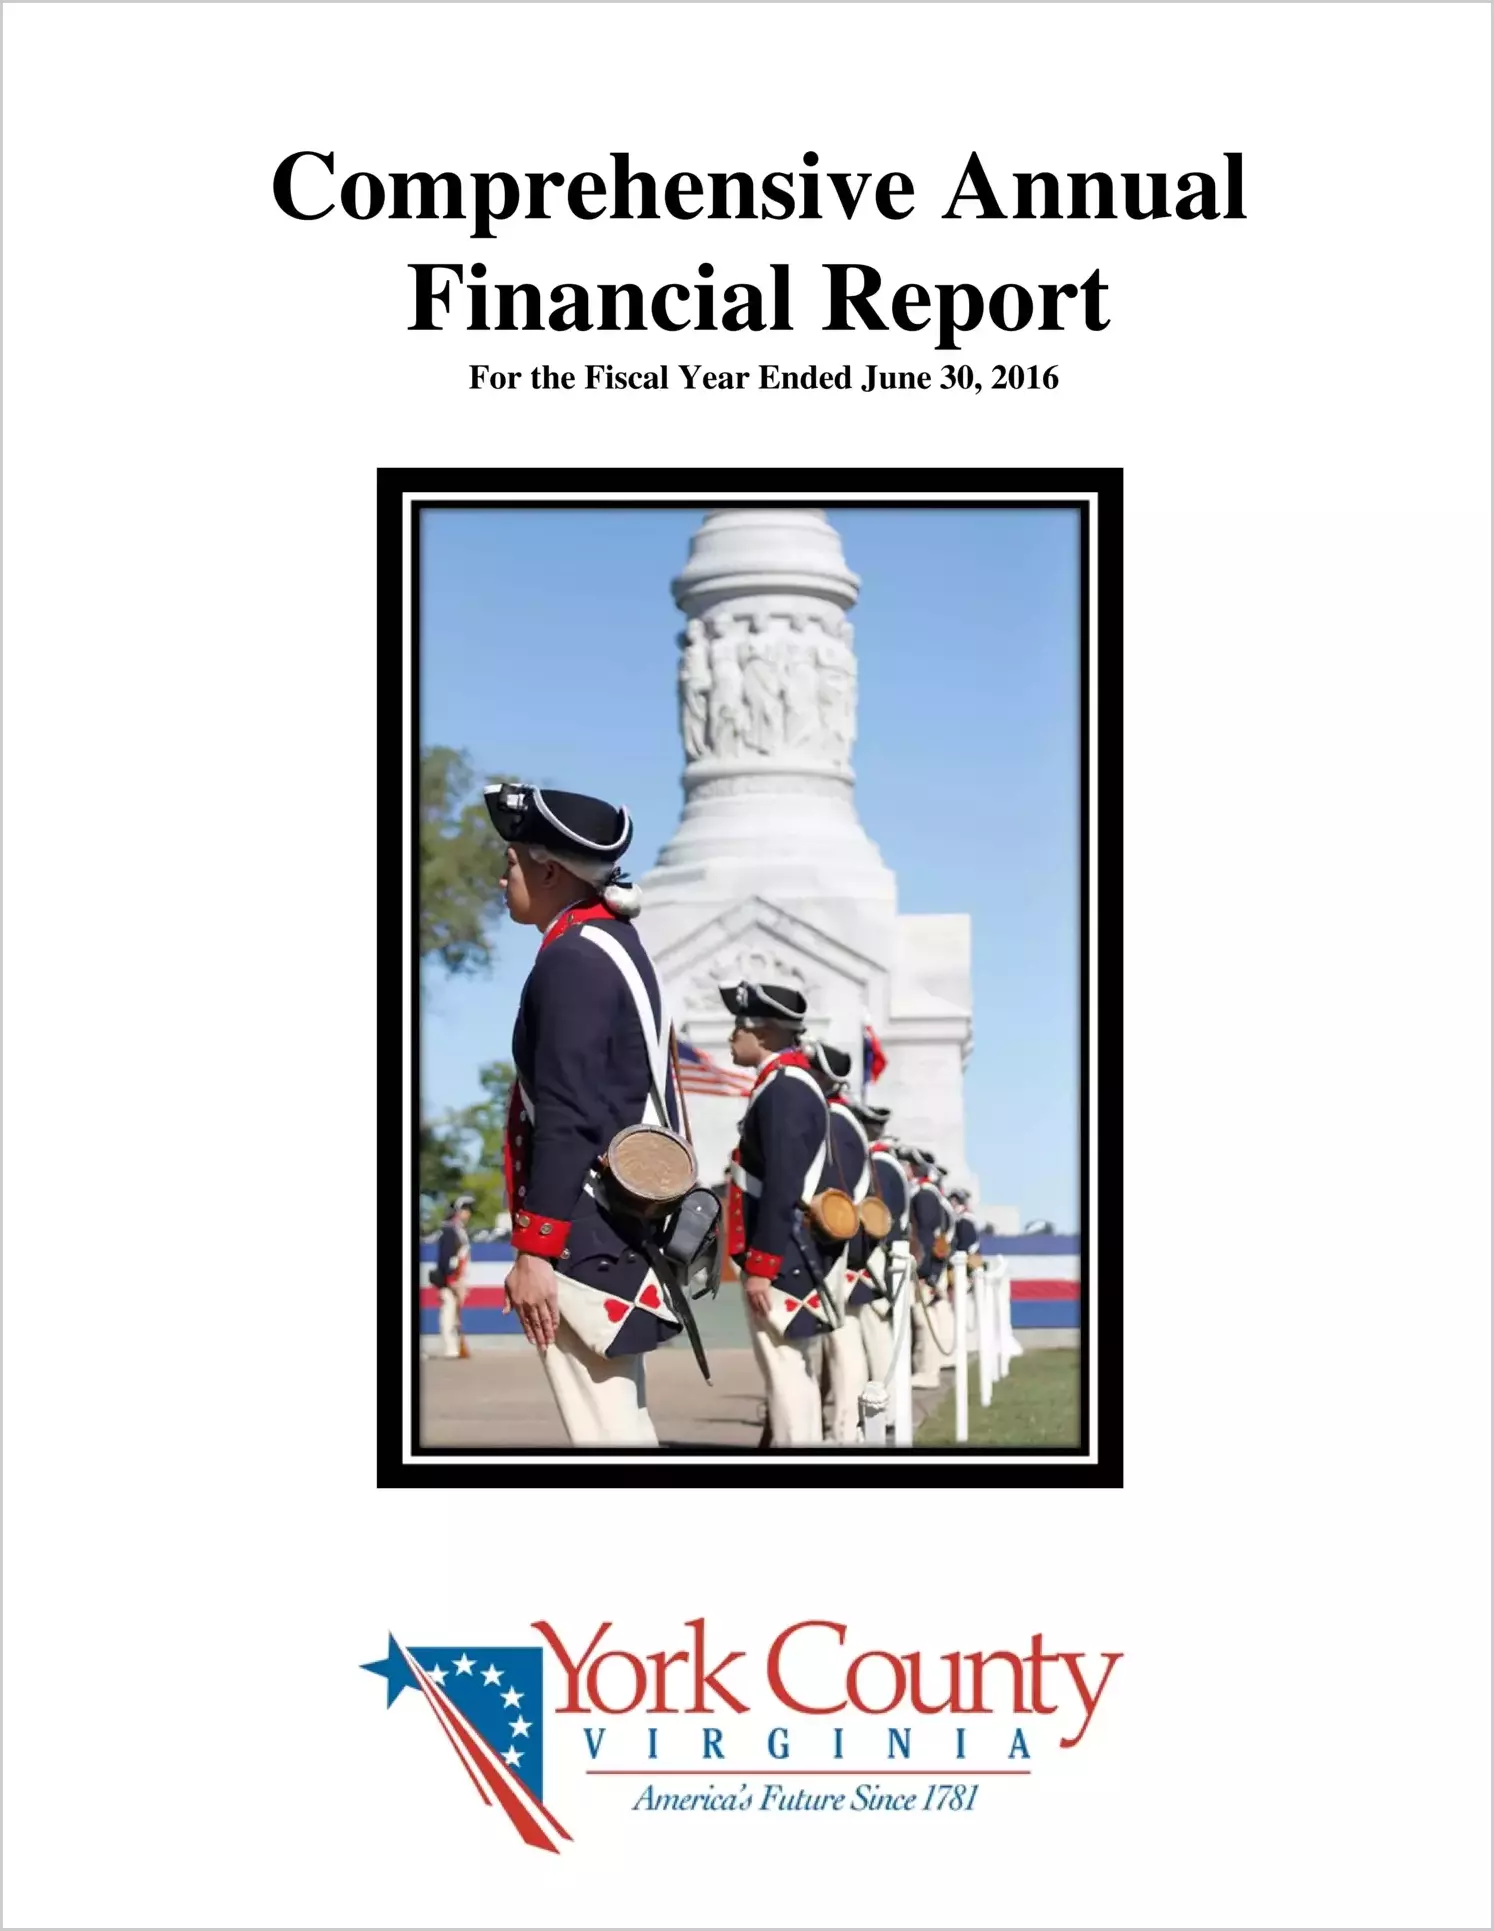 2016 Annual Financial Report for County of York